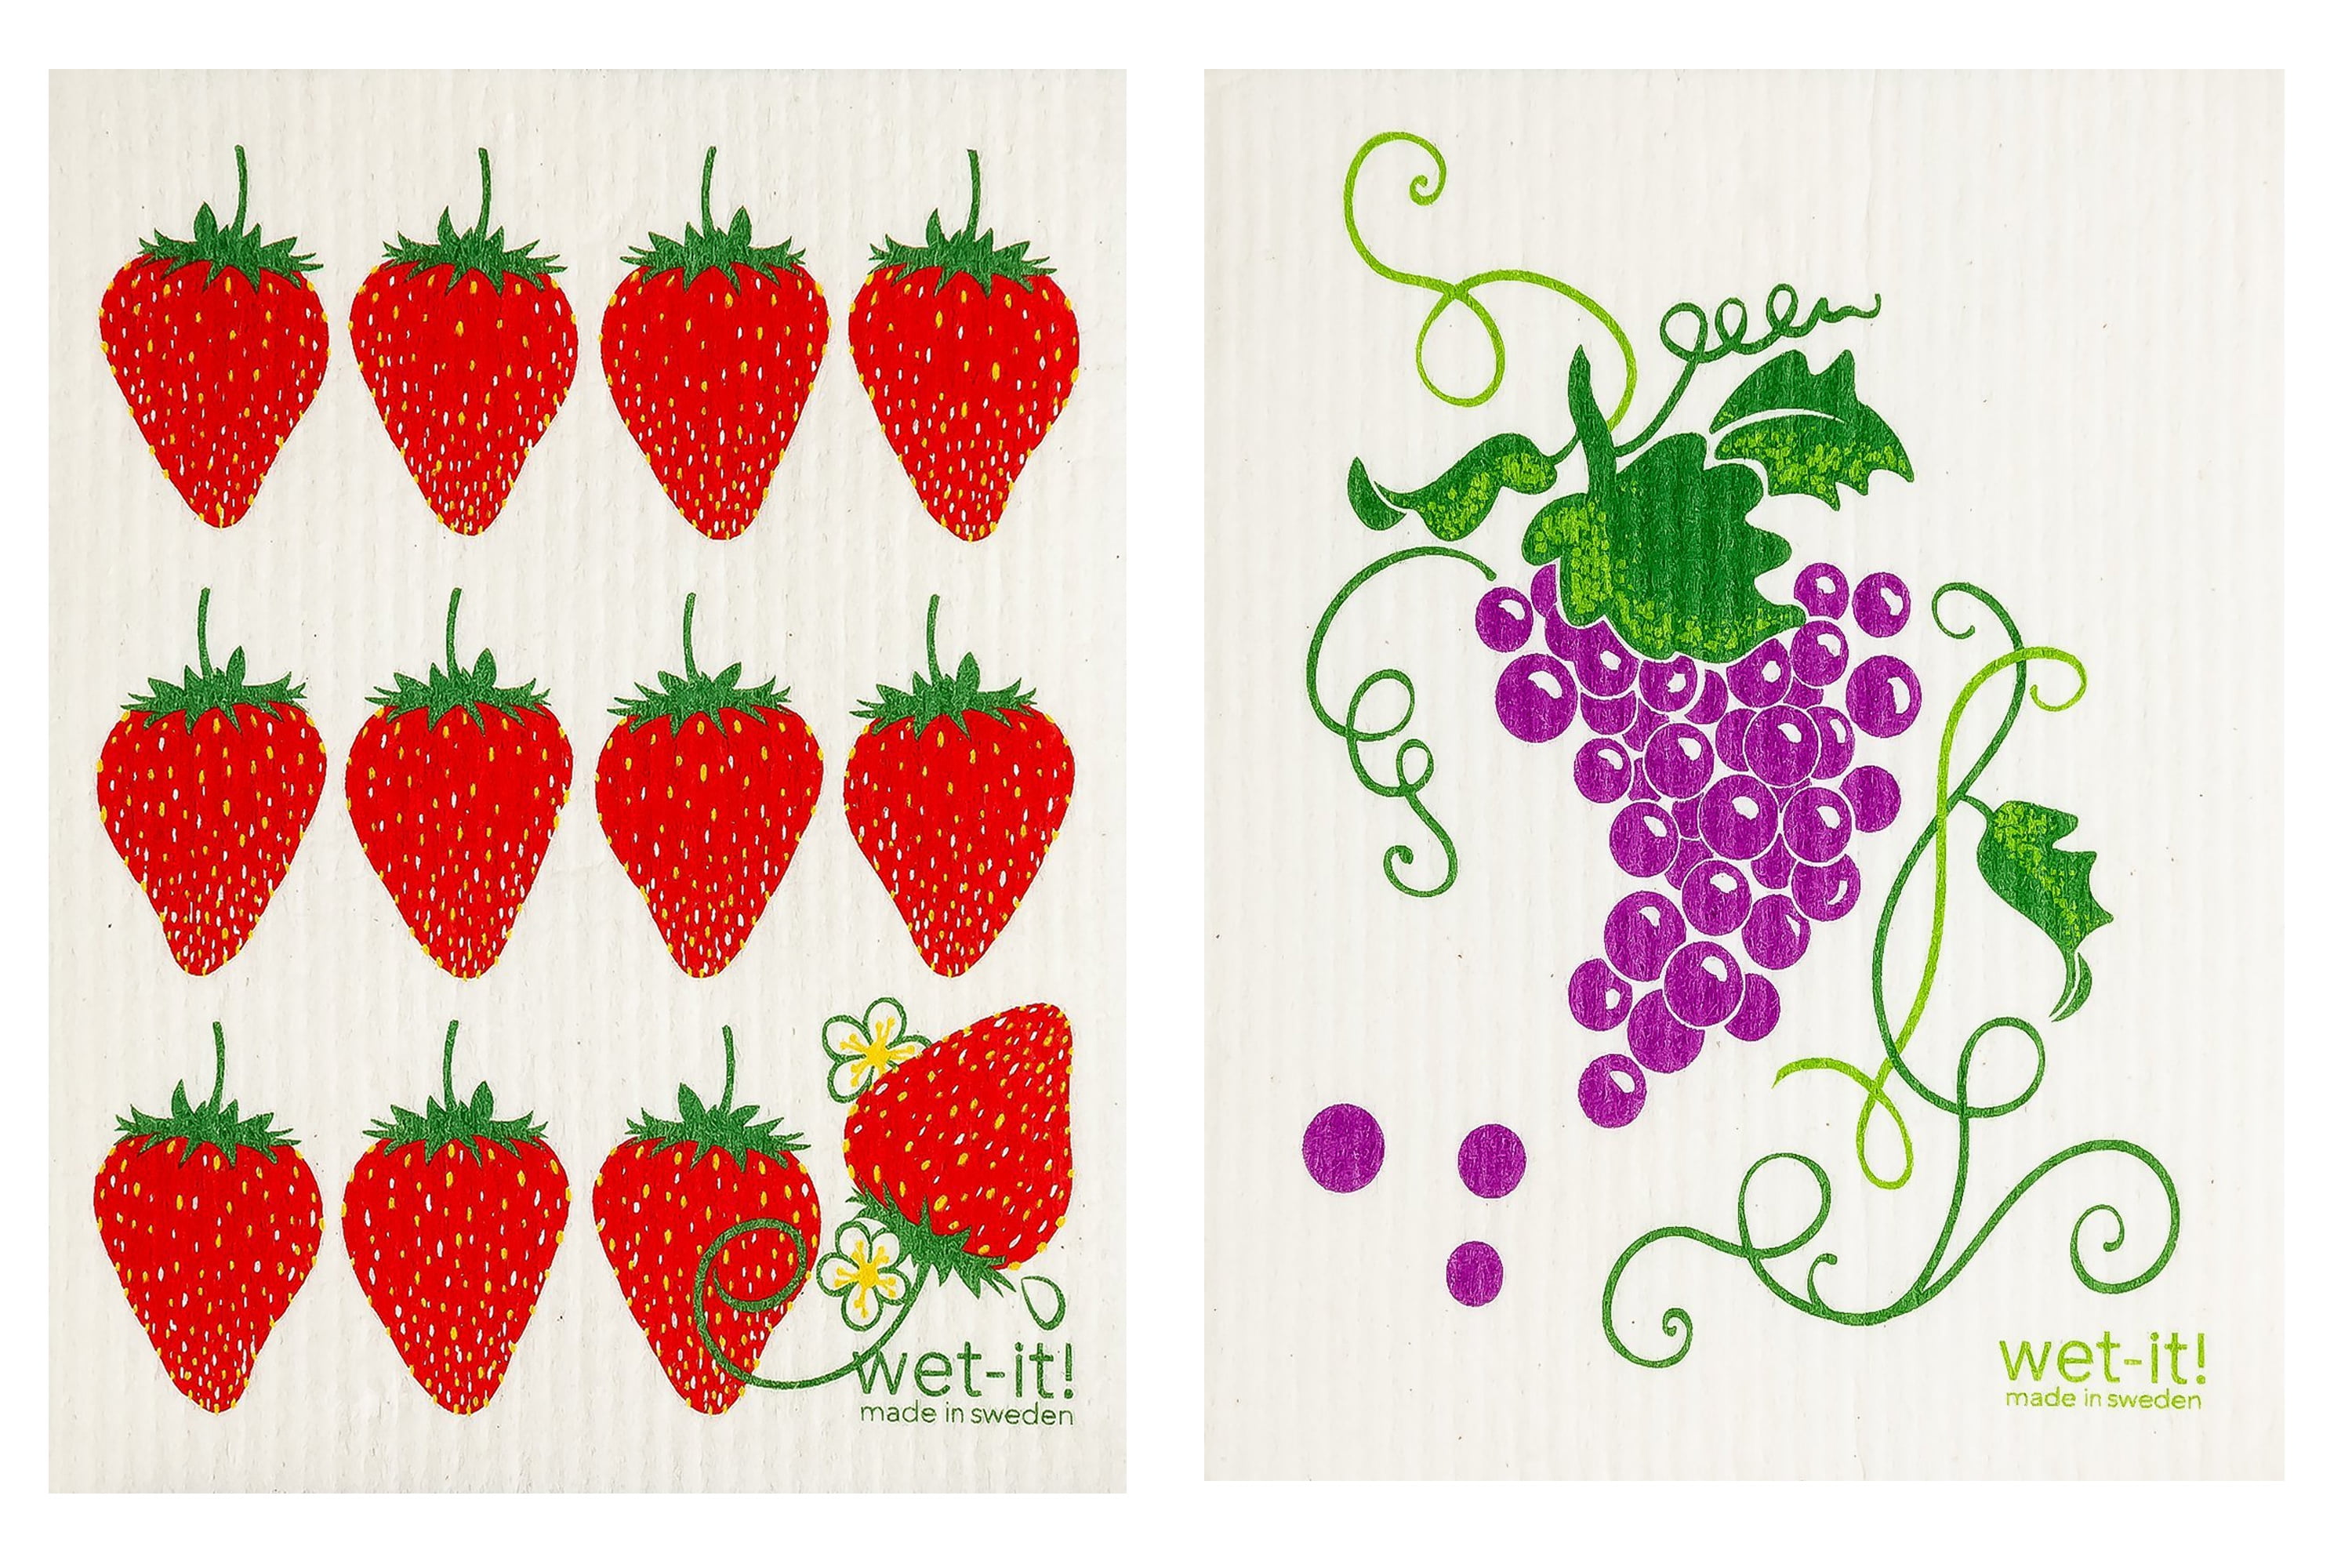 Watermelon & Details about   Wet-It 2 Pack Swedish Treasures Dishcloth & Cleaning Cloth 